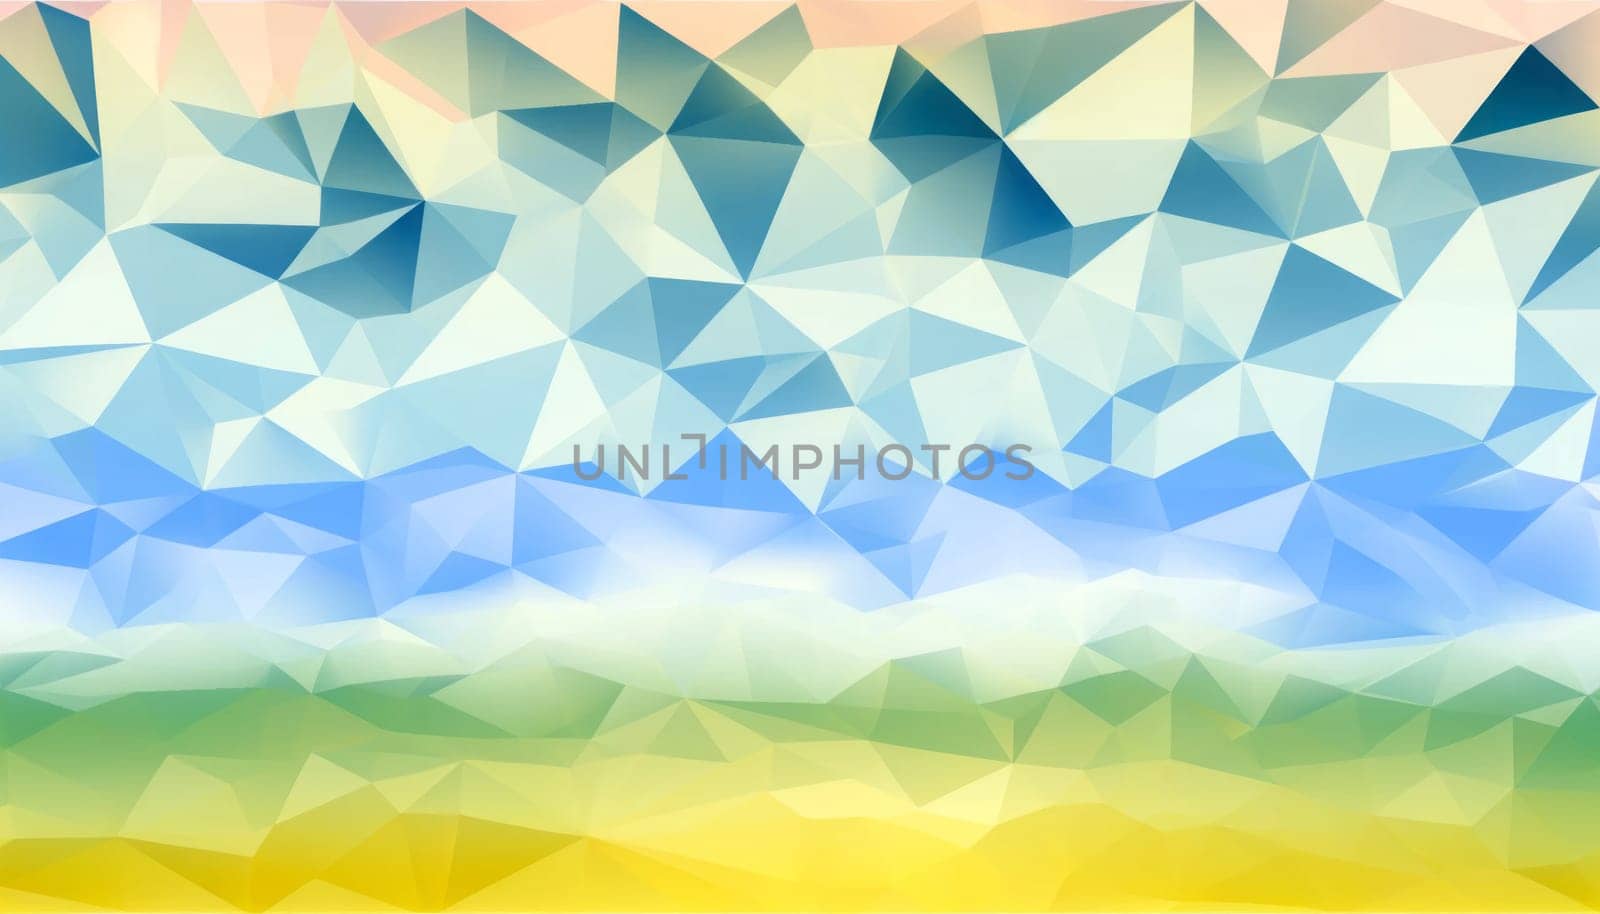 A wide digital illustration of an abstract low poly background. The image consists of a multitude of geometric shapes forming a crystalline pattern. It features a gradient of pastel colors ranging from cool blues at the bottom to warm hues of yellow and orange at the top, mimicking a landscape or sky at sunrise. The low poly shapes have a subtle transparency that gives the image a layered, ethereal feel, with a soft light diffusing throughout the composition.